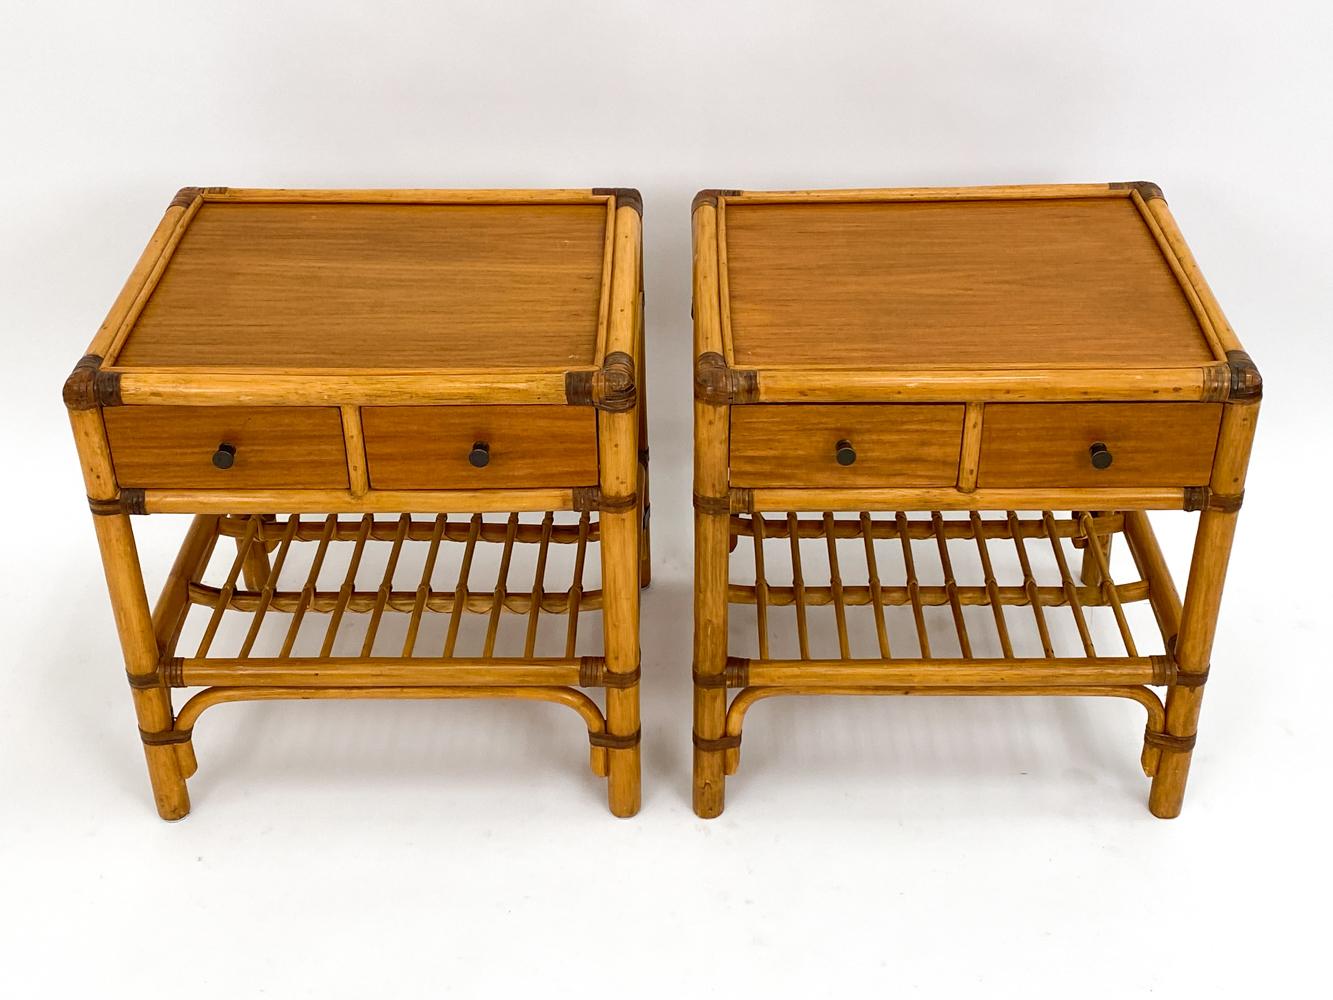 Pair of DUX Swedish Mid-Century Bamboo & Rattan End Tables or Nightstands In Good Condition For Sale In Norwalk, CT